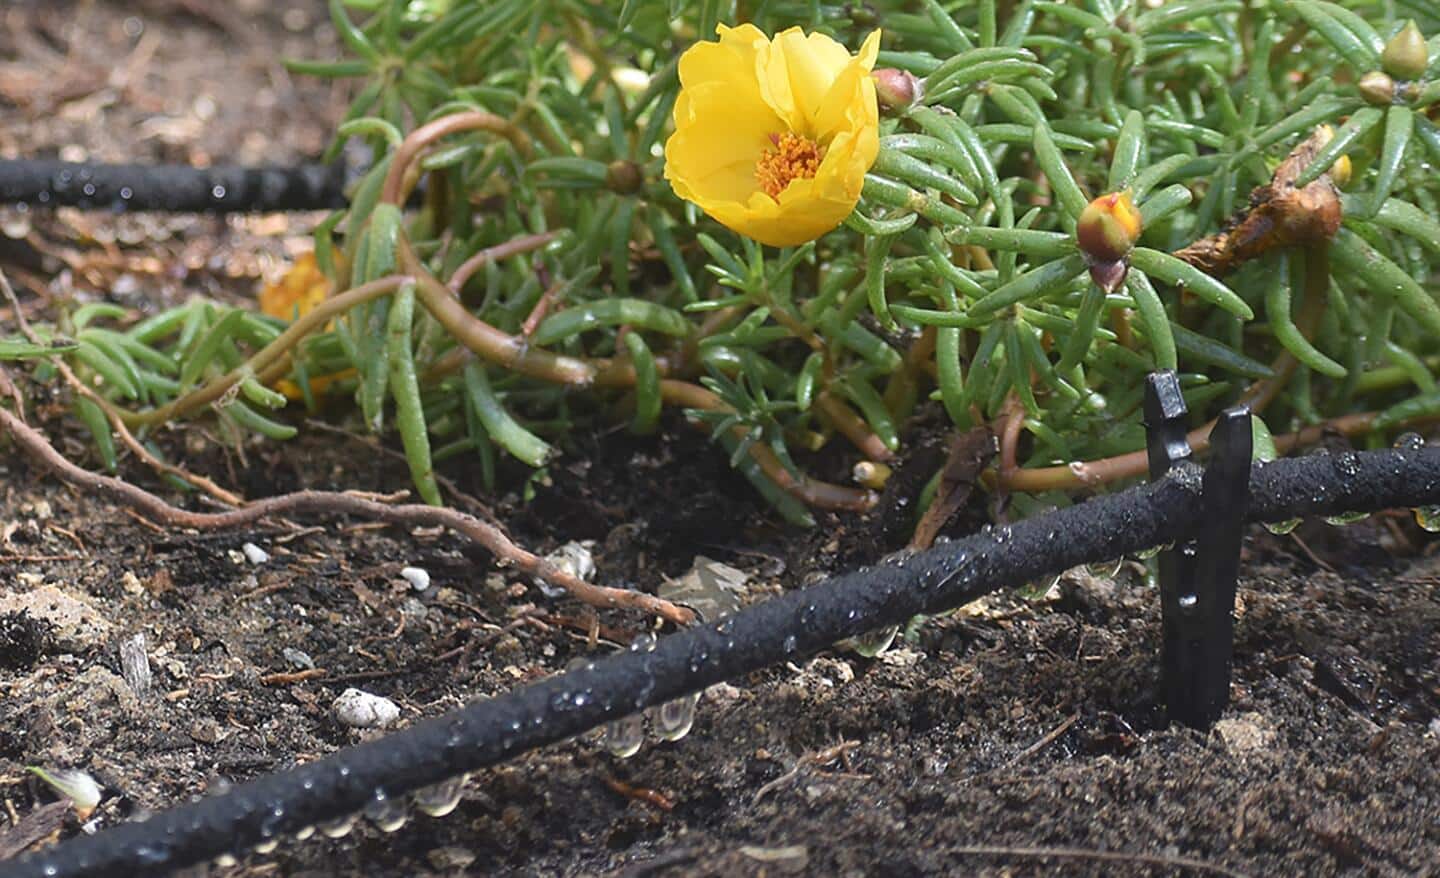 Soaker hose dripping water into a flower bed